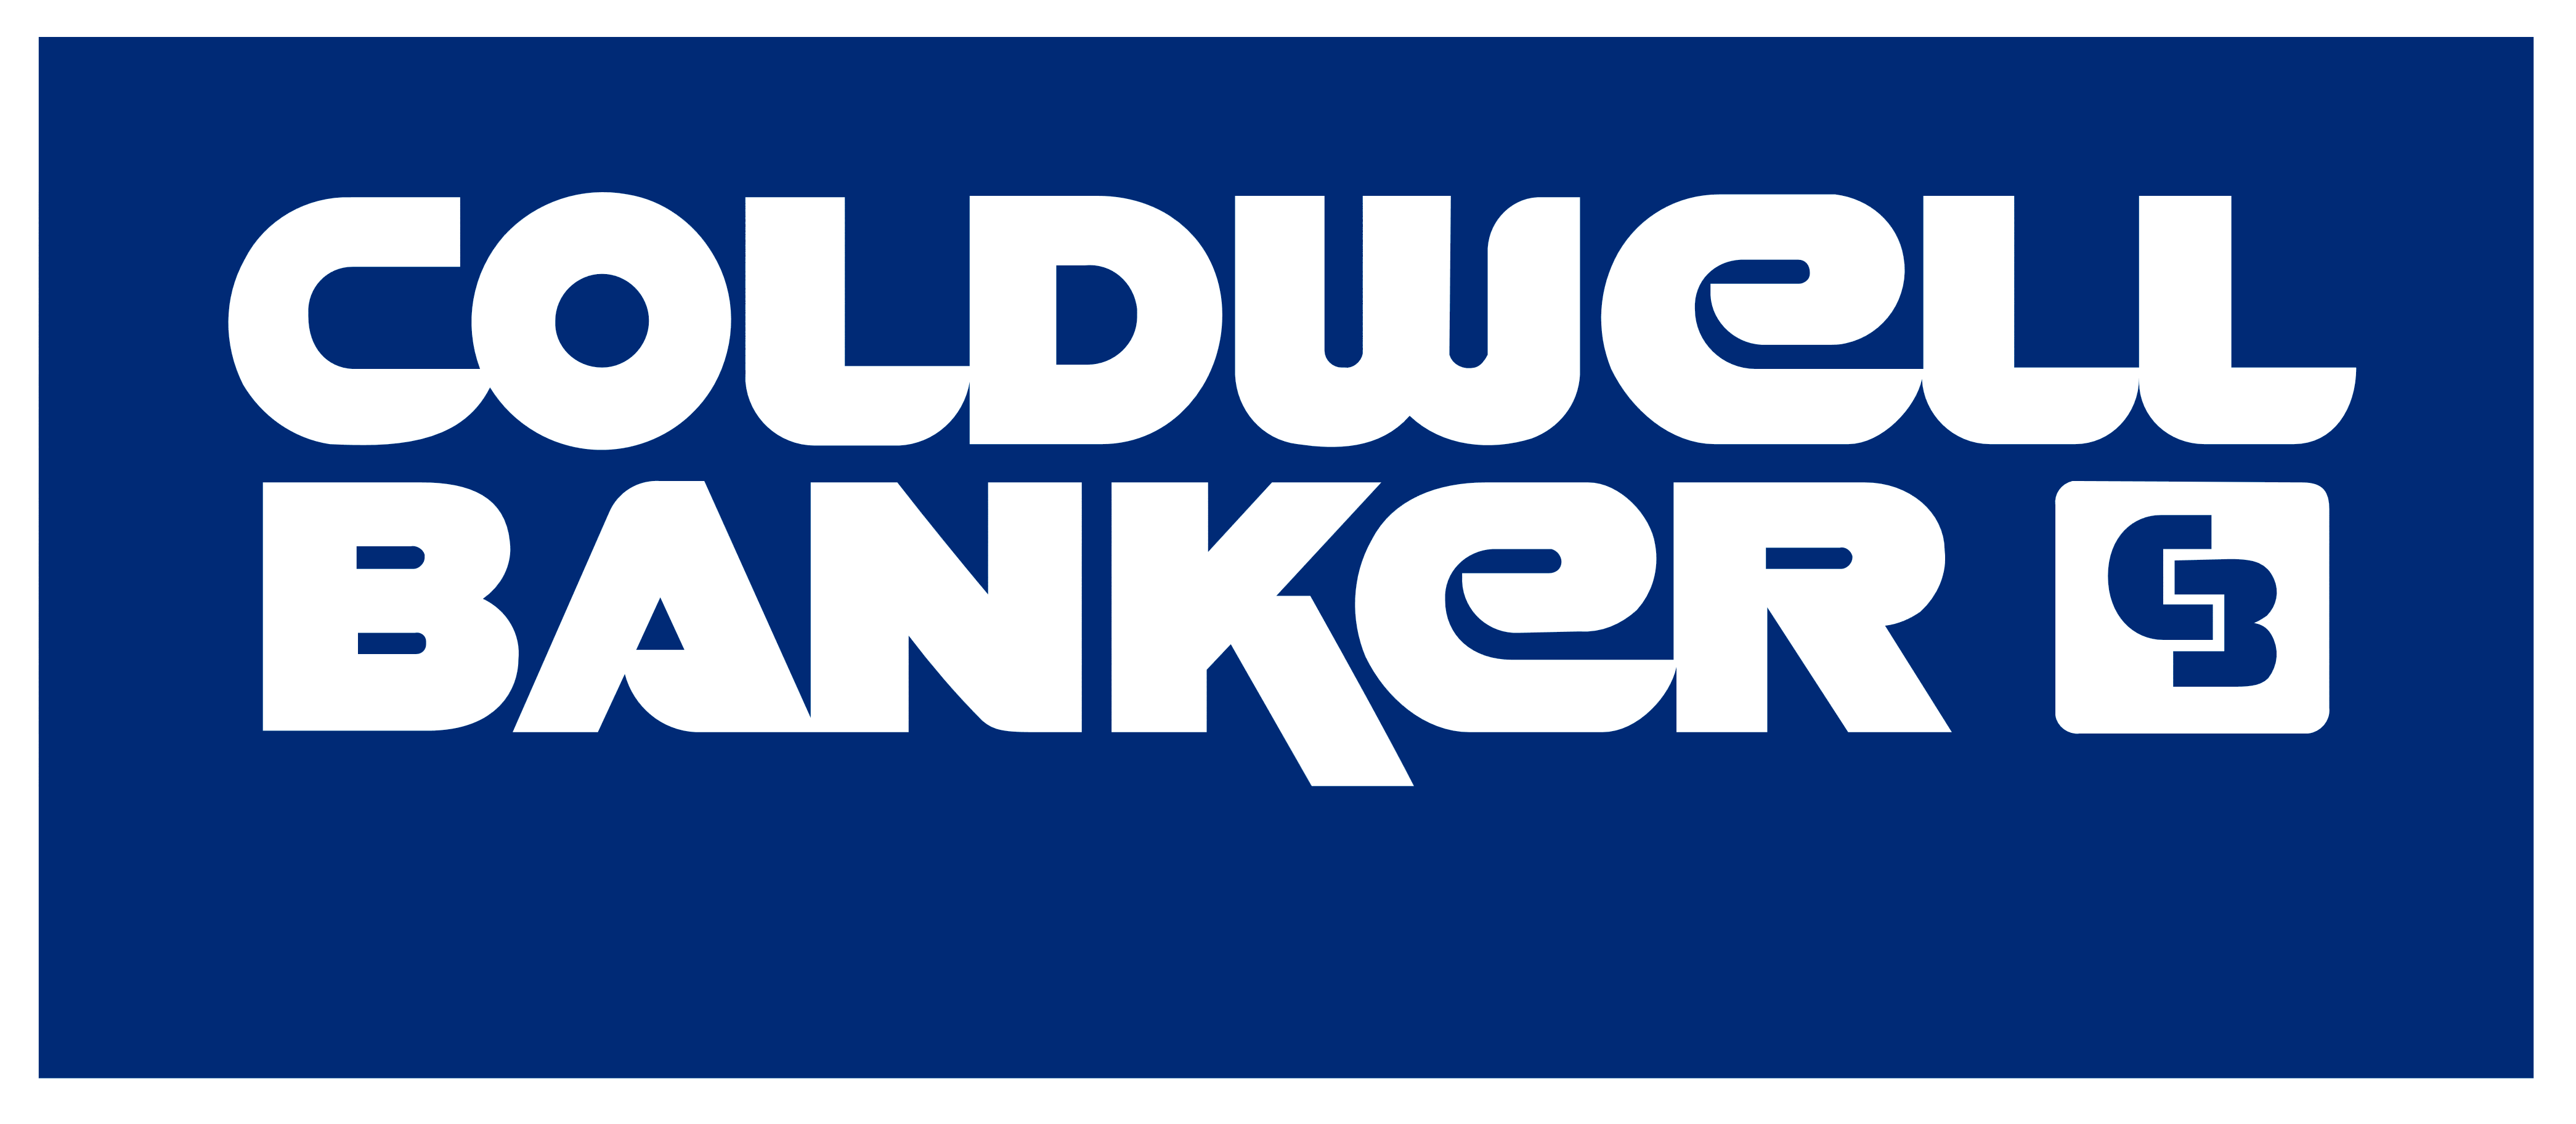 A large logo of Coldwell Banker is shown in the image